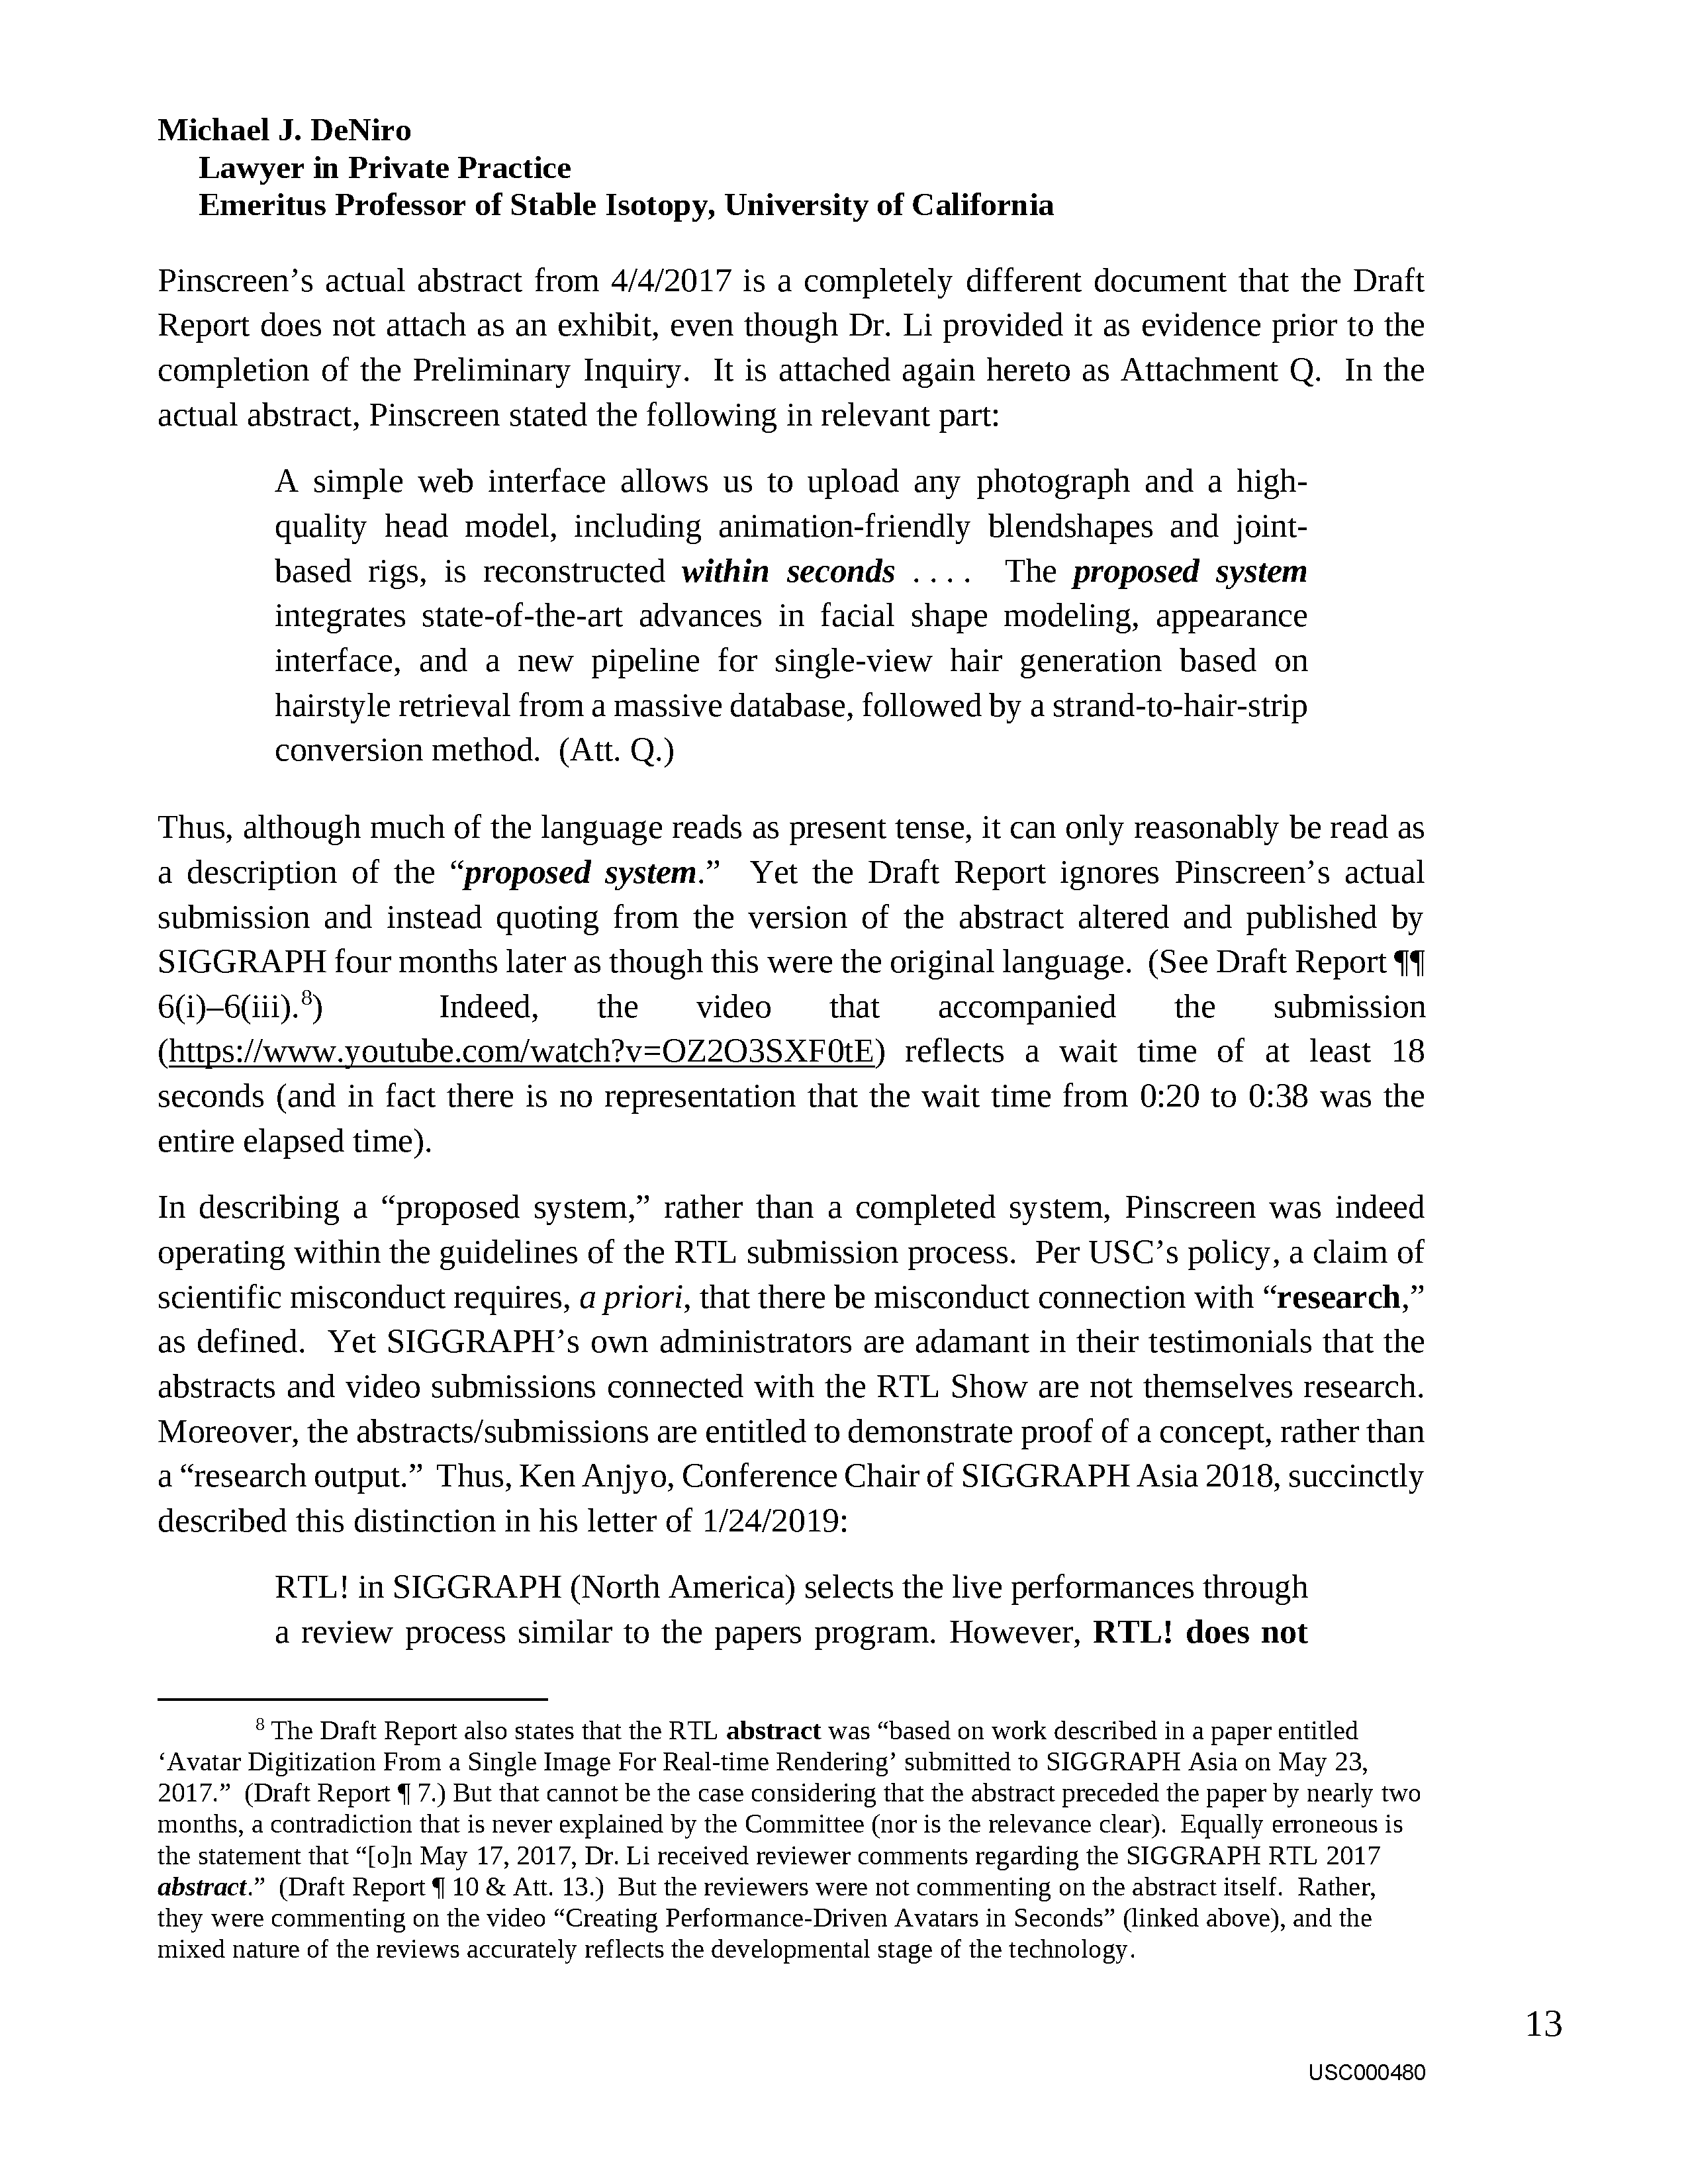 USC's Investigation Report re Hao Li's and Pinscreen's Scientific Misconduct at ACM SIGGRAPH RTL 2017 - Full Report Page 482